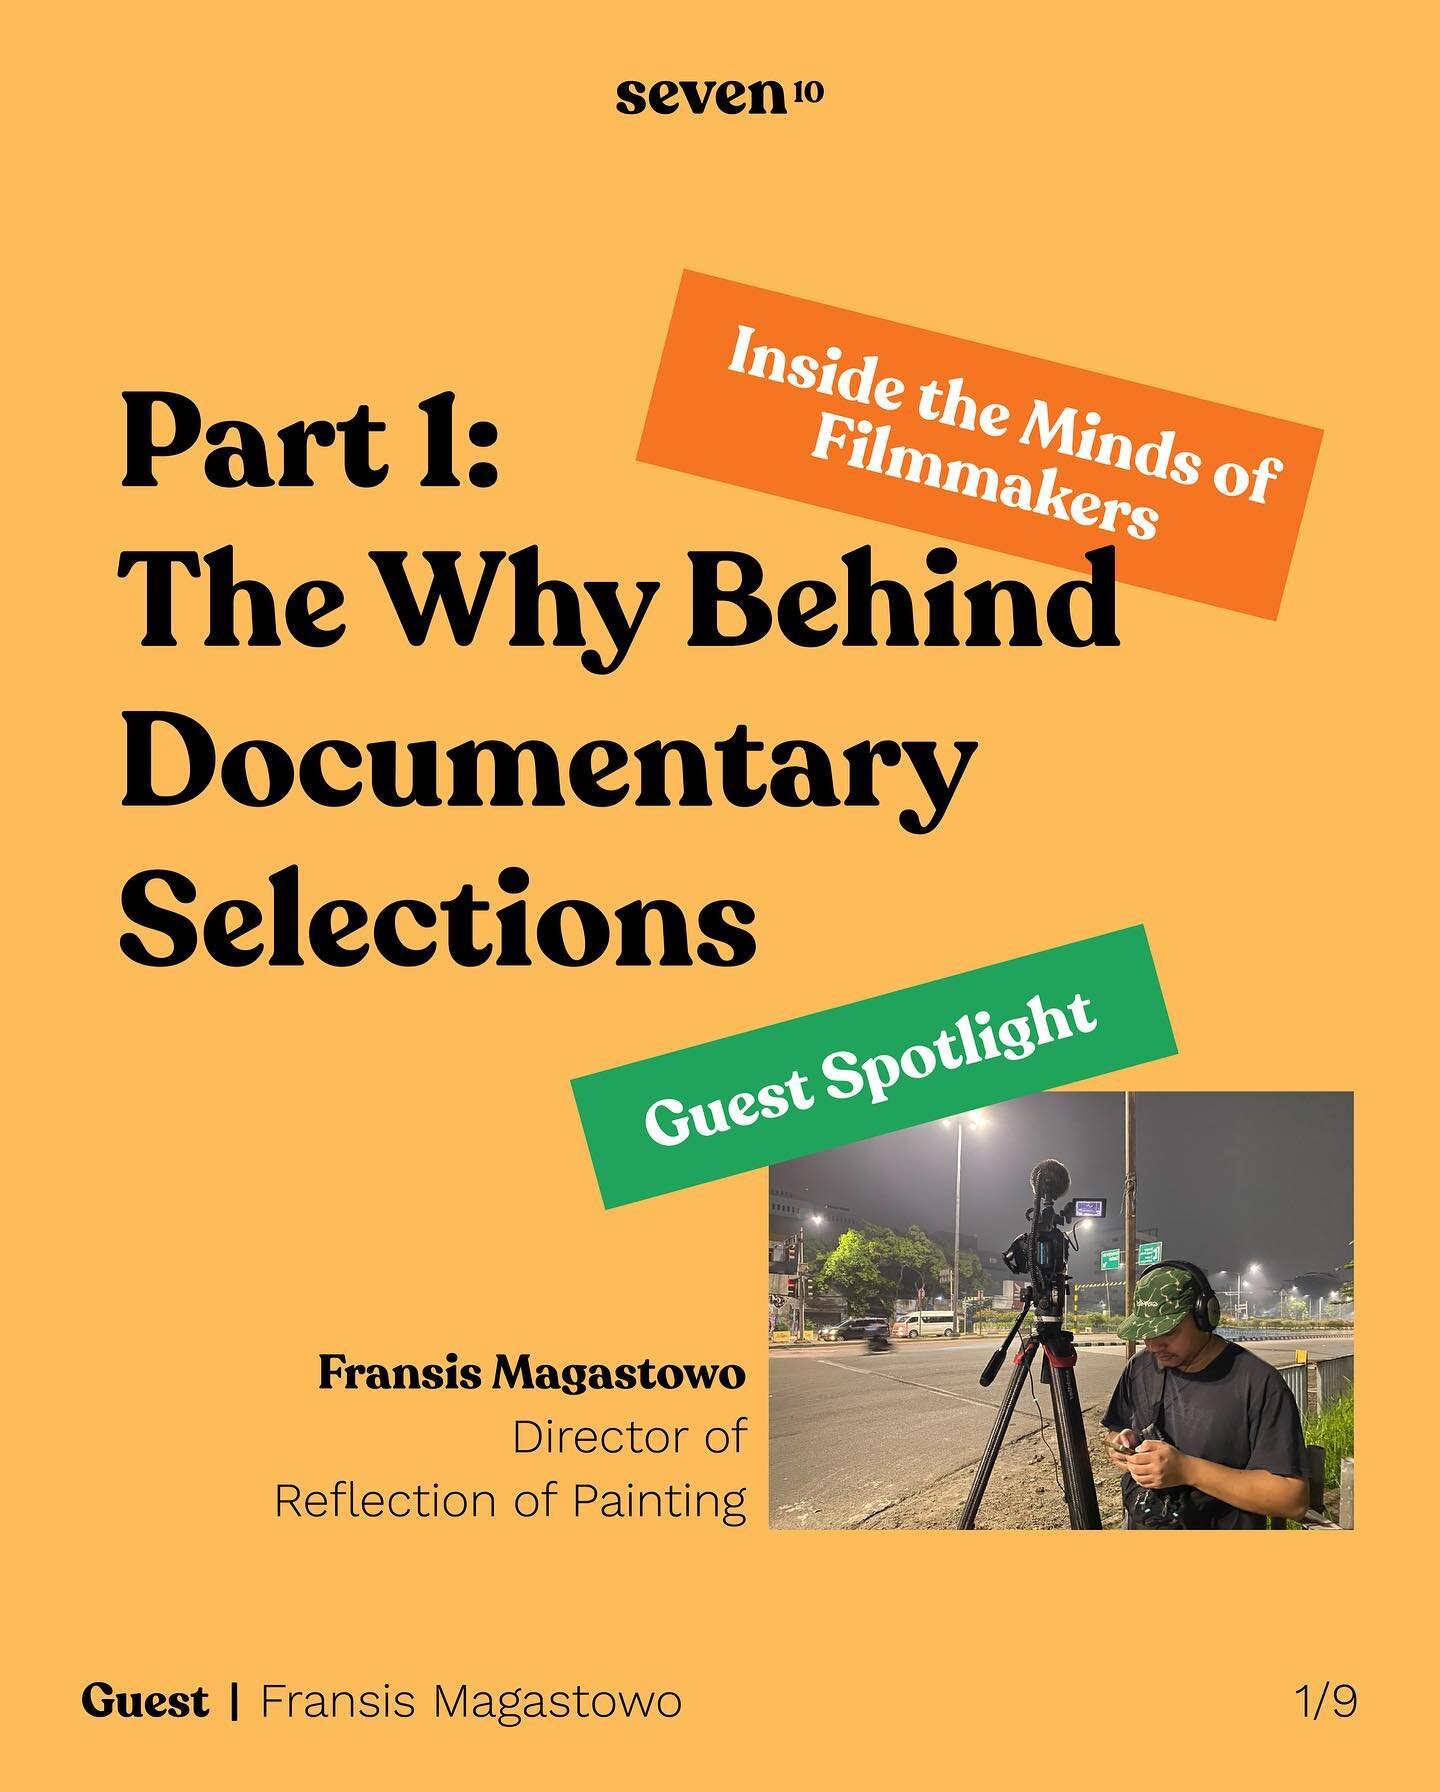 Fransis Magastowo, a filmmaker from Jogja, shares his personal experience of how he discovered his passion for the documentary genre. From a college mentor to being inspired by renowned filmmakers, he found a sense of creative freedom and expression 